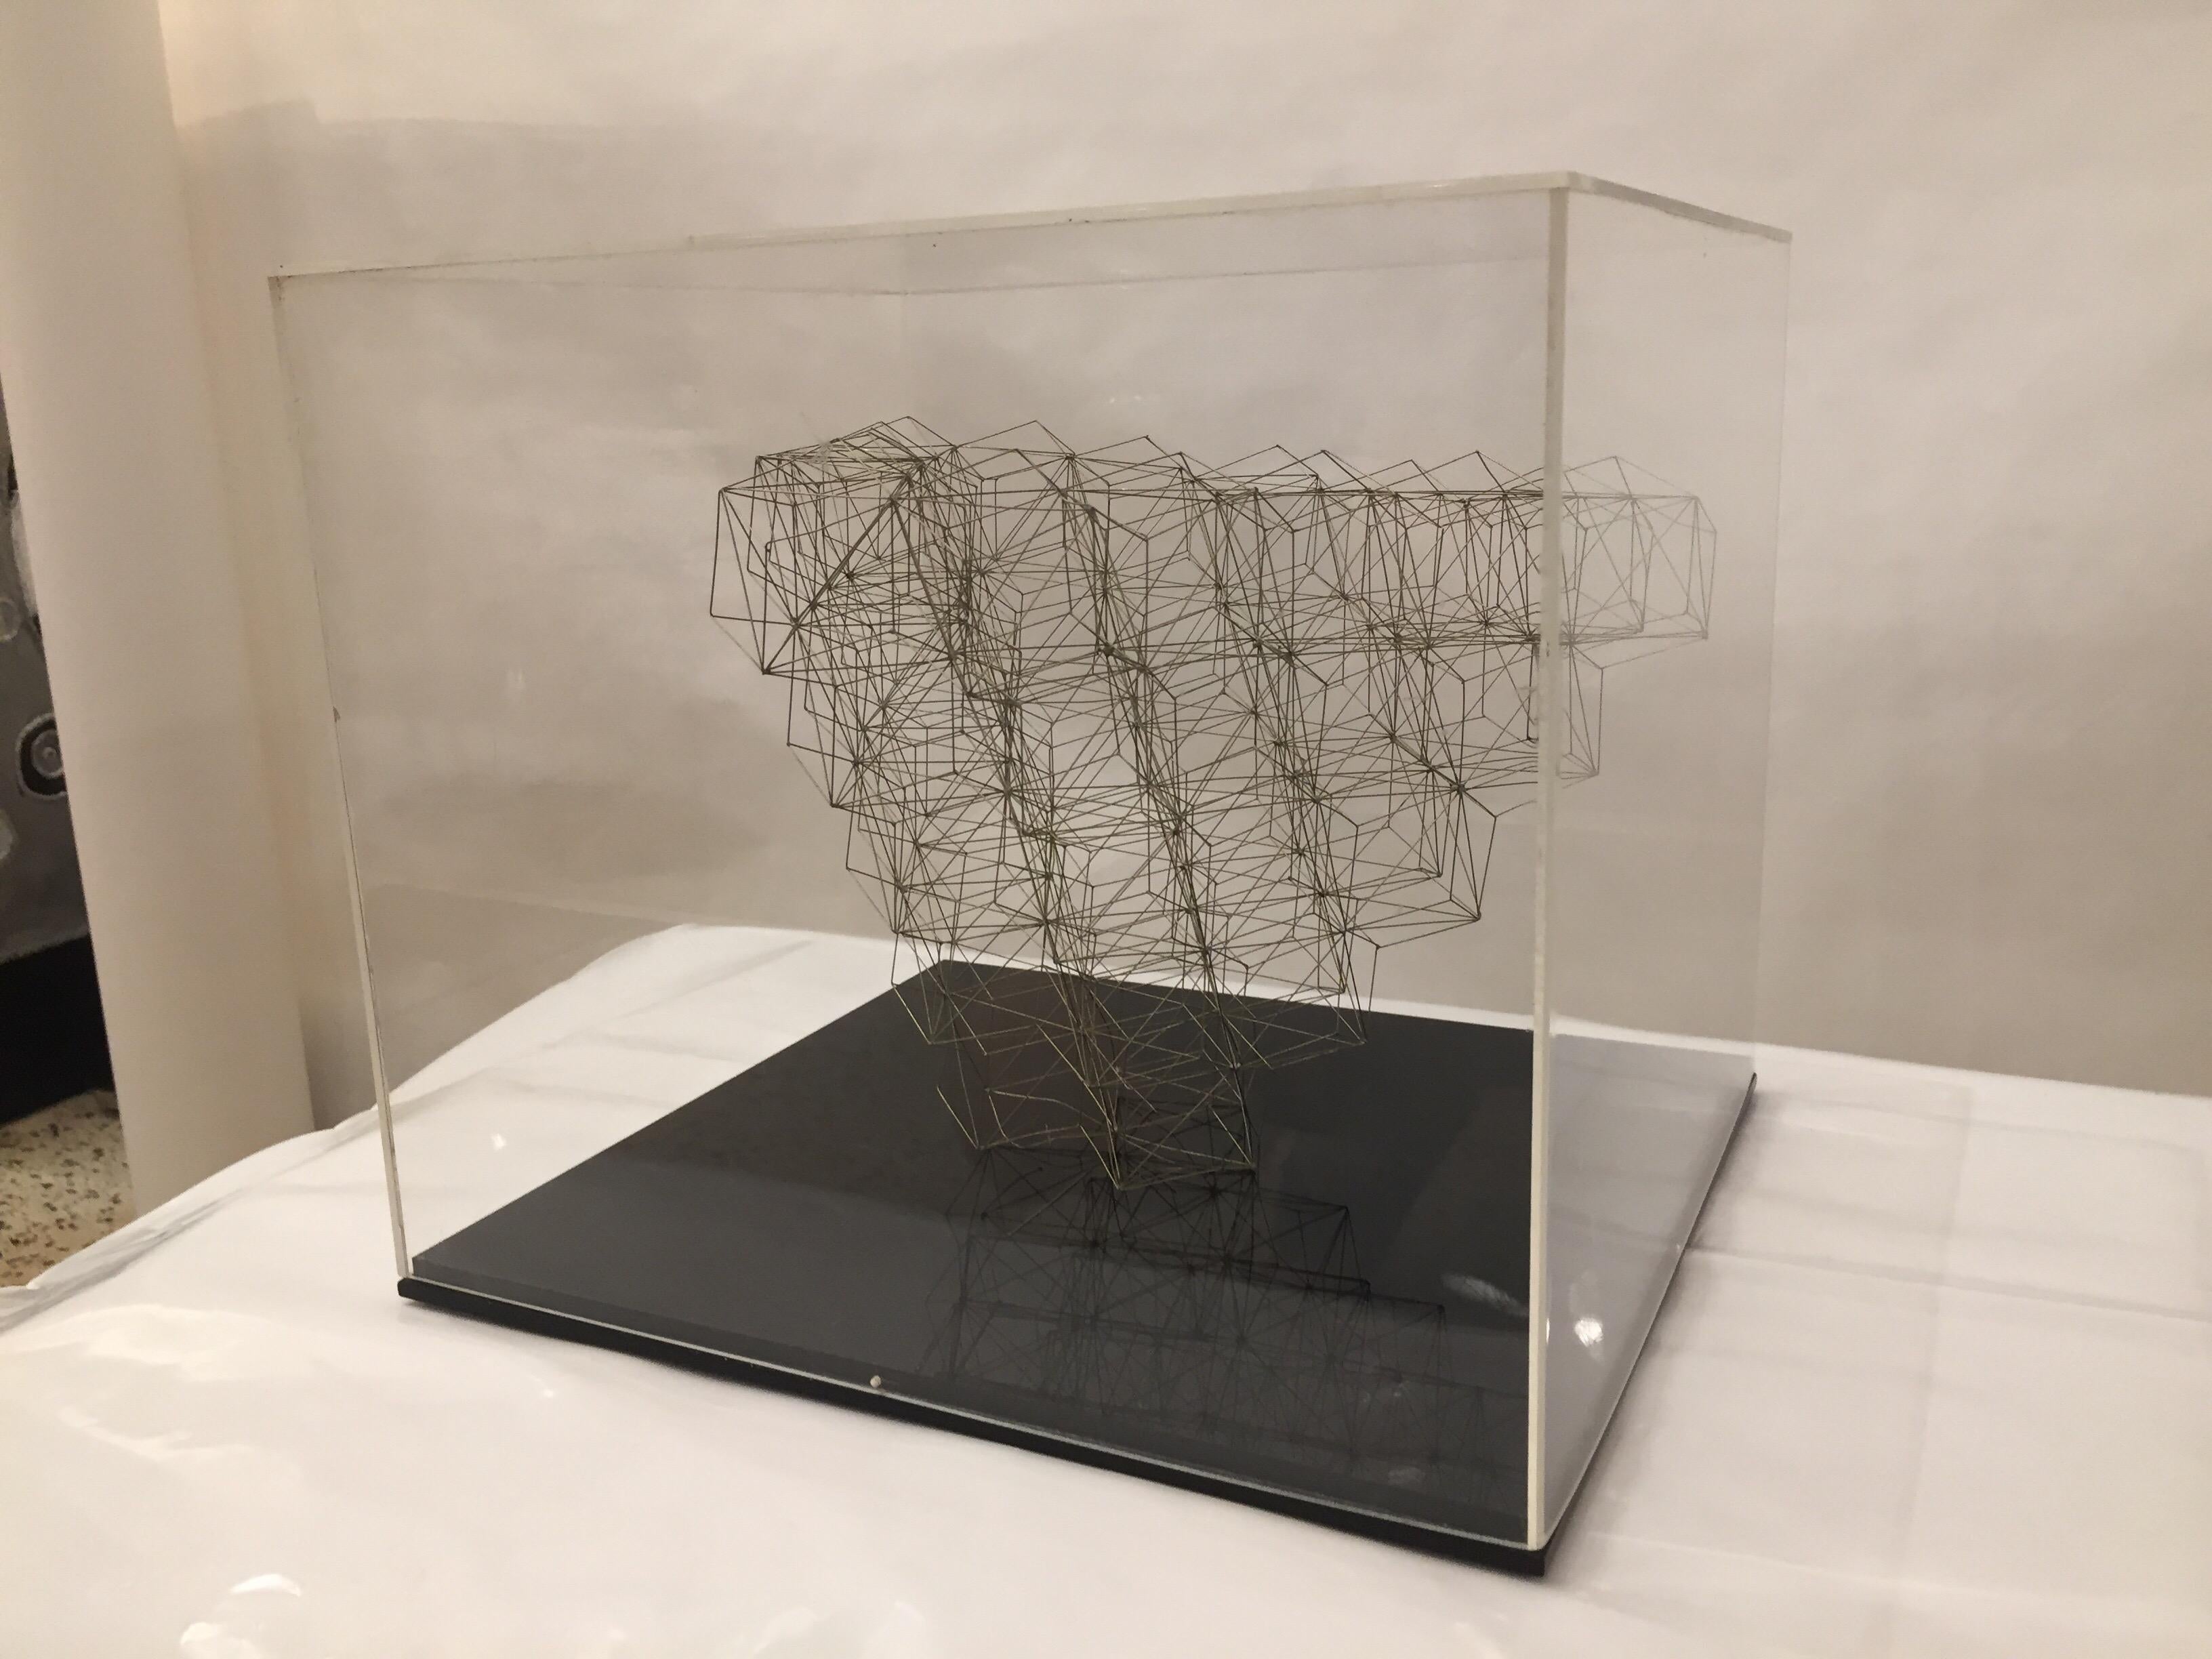 This American artist (Marilyn Gelfman-Karp) created this unique and beautiful wire art in 1970. She was the wife of famed art dealer and Pop Art Pioneer Ivan Karp. This is made of soldered wire sculpture in a plexiglass display box. Signature is 